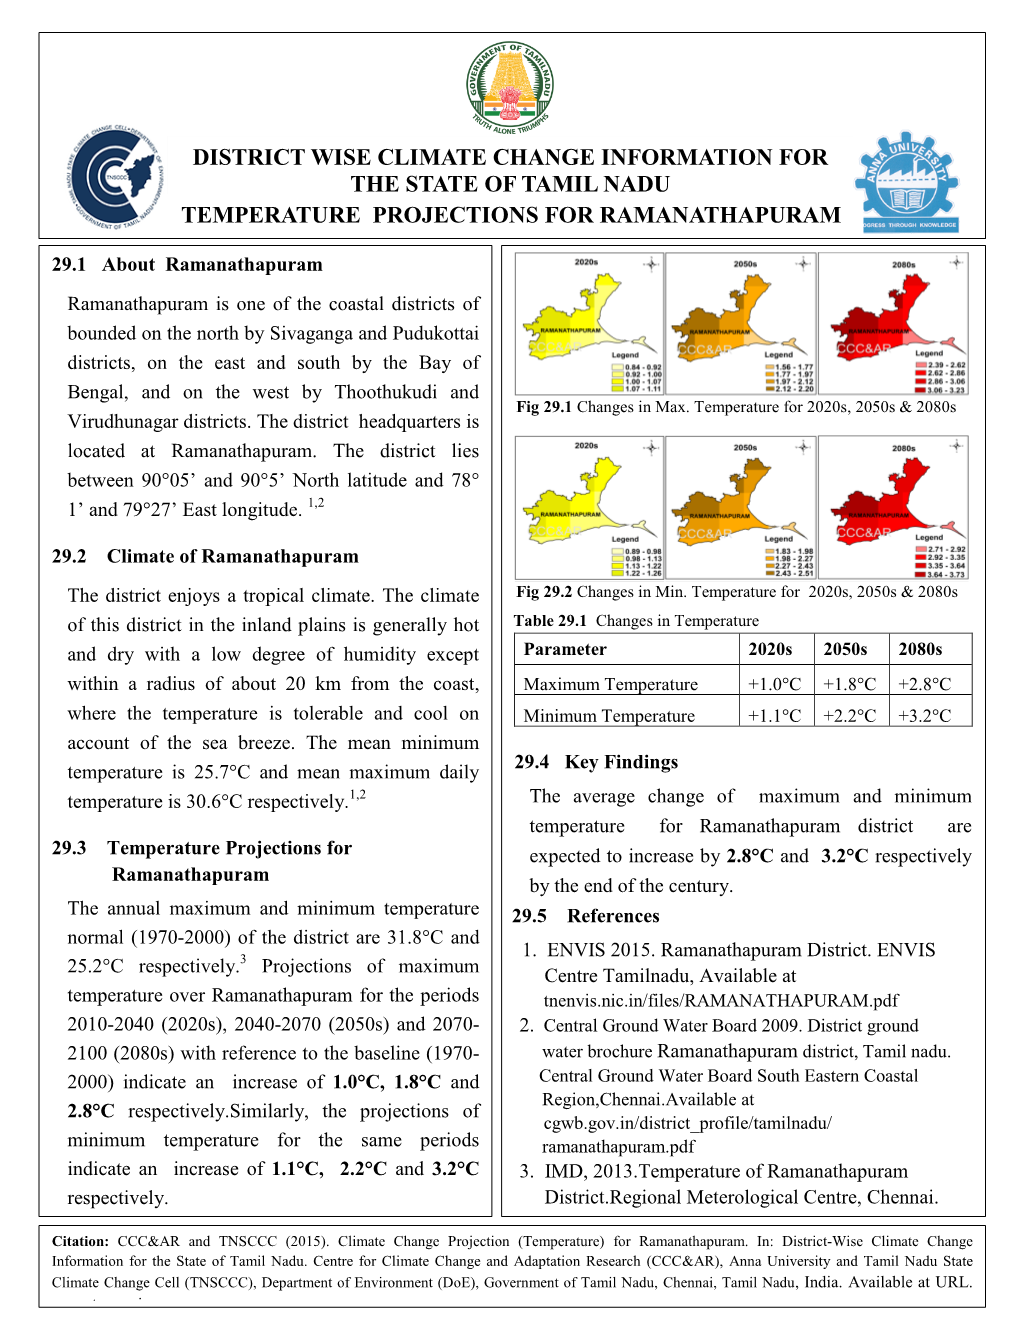 District Wise Climate Change Information for the State of Tamil Nadu Temperature Projections for Ramanathapuram